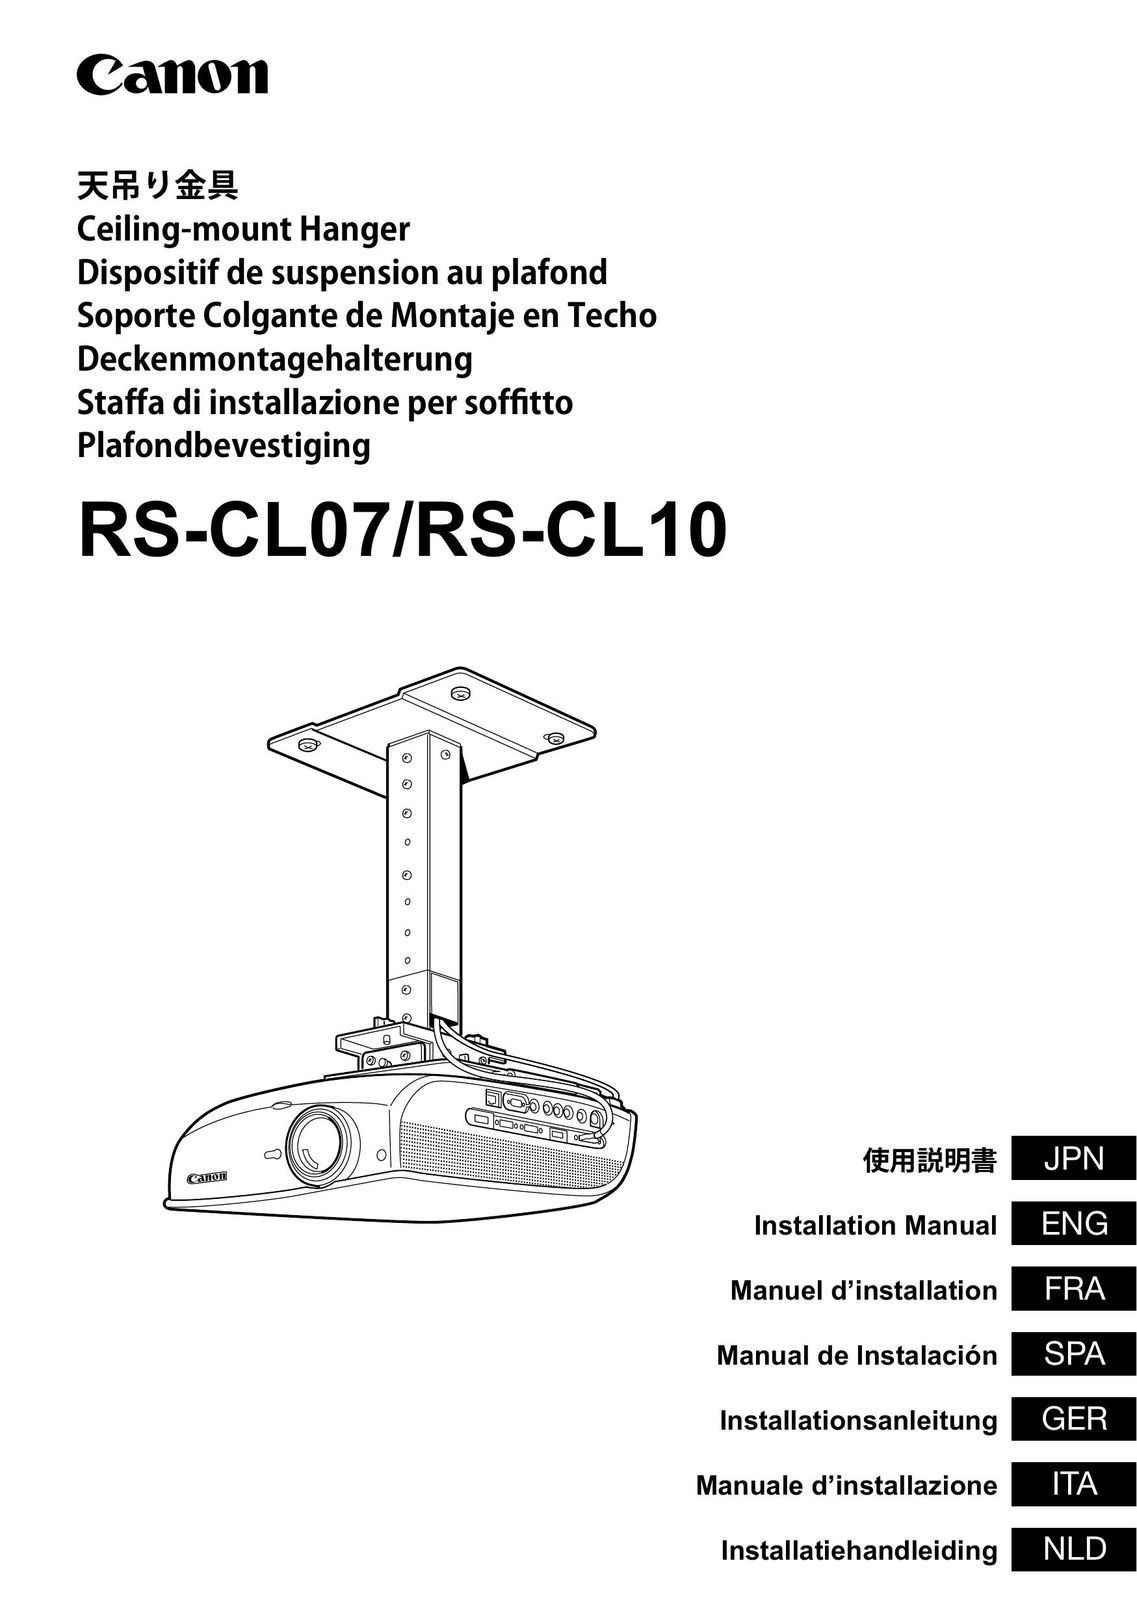 Canon RS-CL10 Indoor Furnishings User Manual